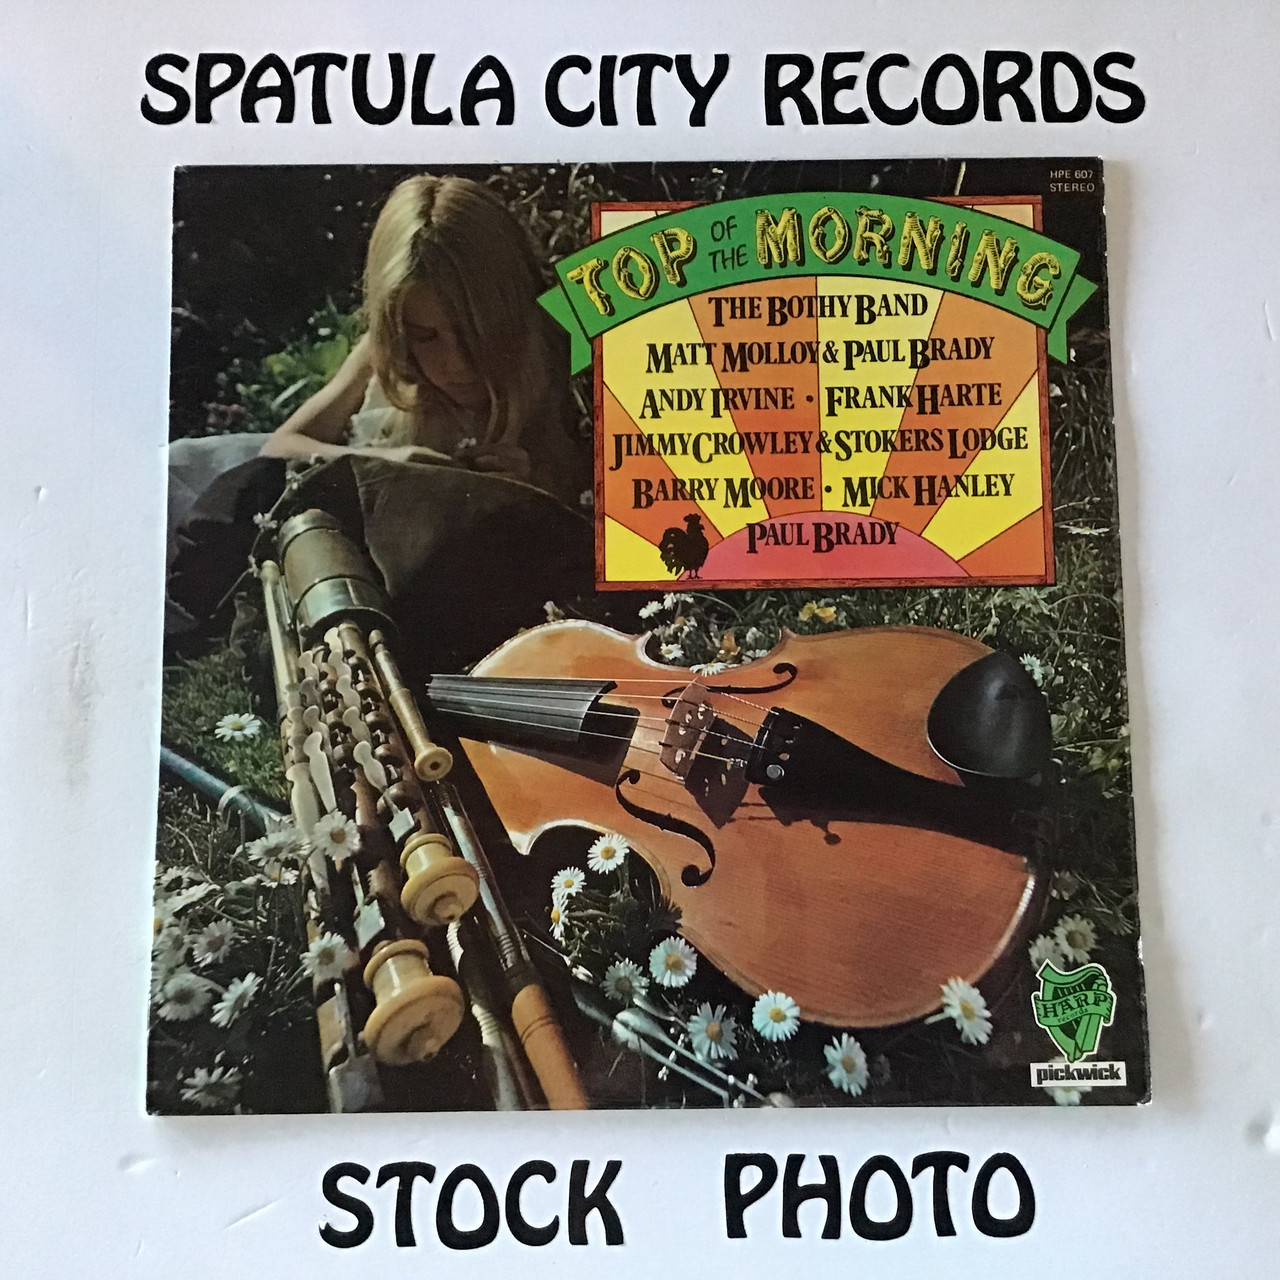 Top of The Morning - compilation - IMPORT - vinyl record LP